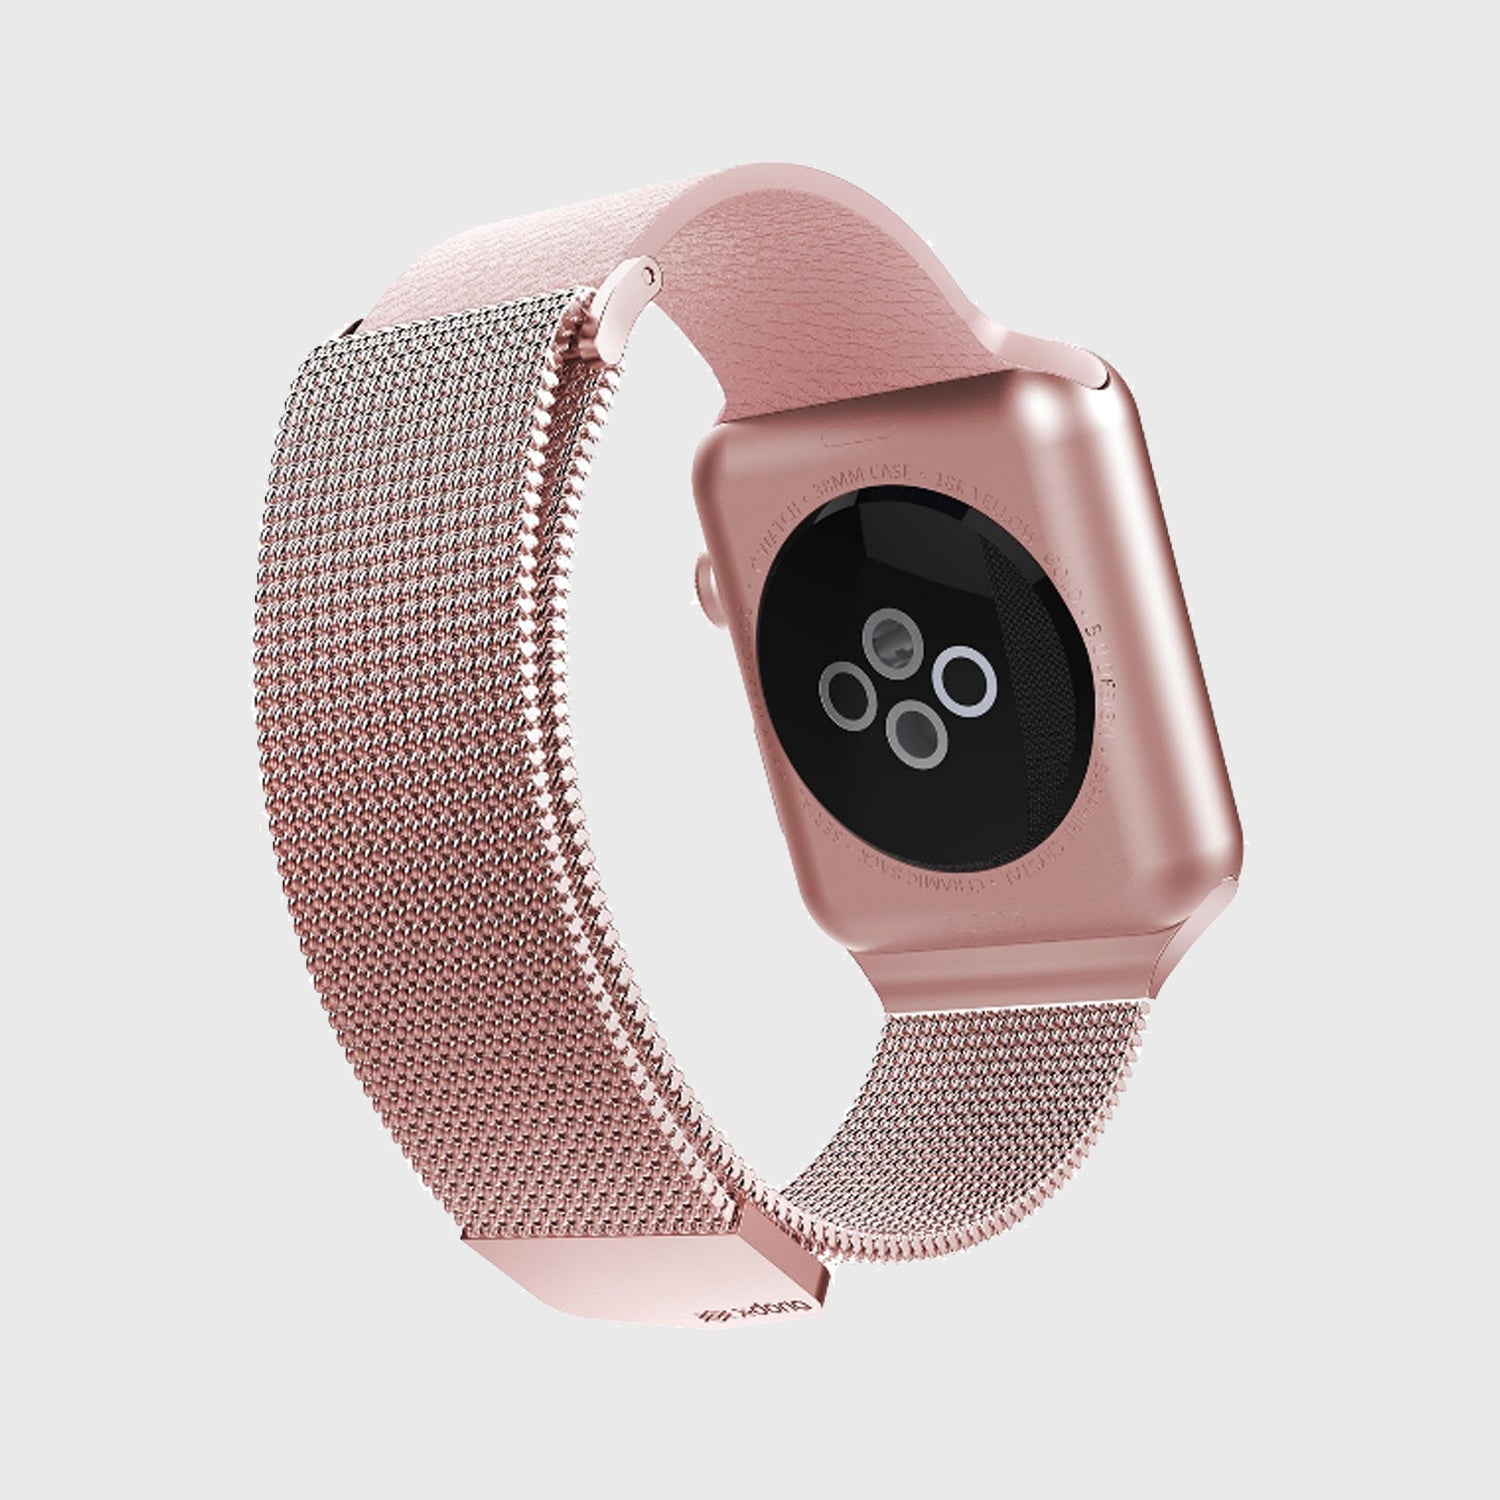 An Apple Watch with a Raptic rose gold stainless steel mesh band.